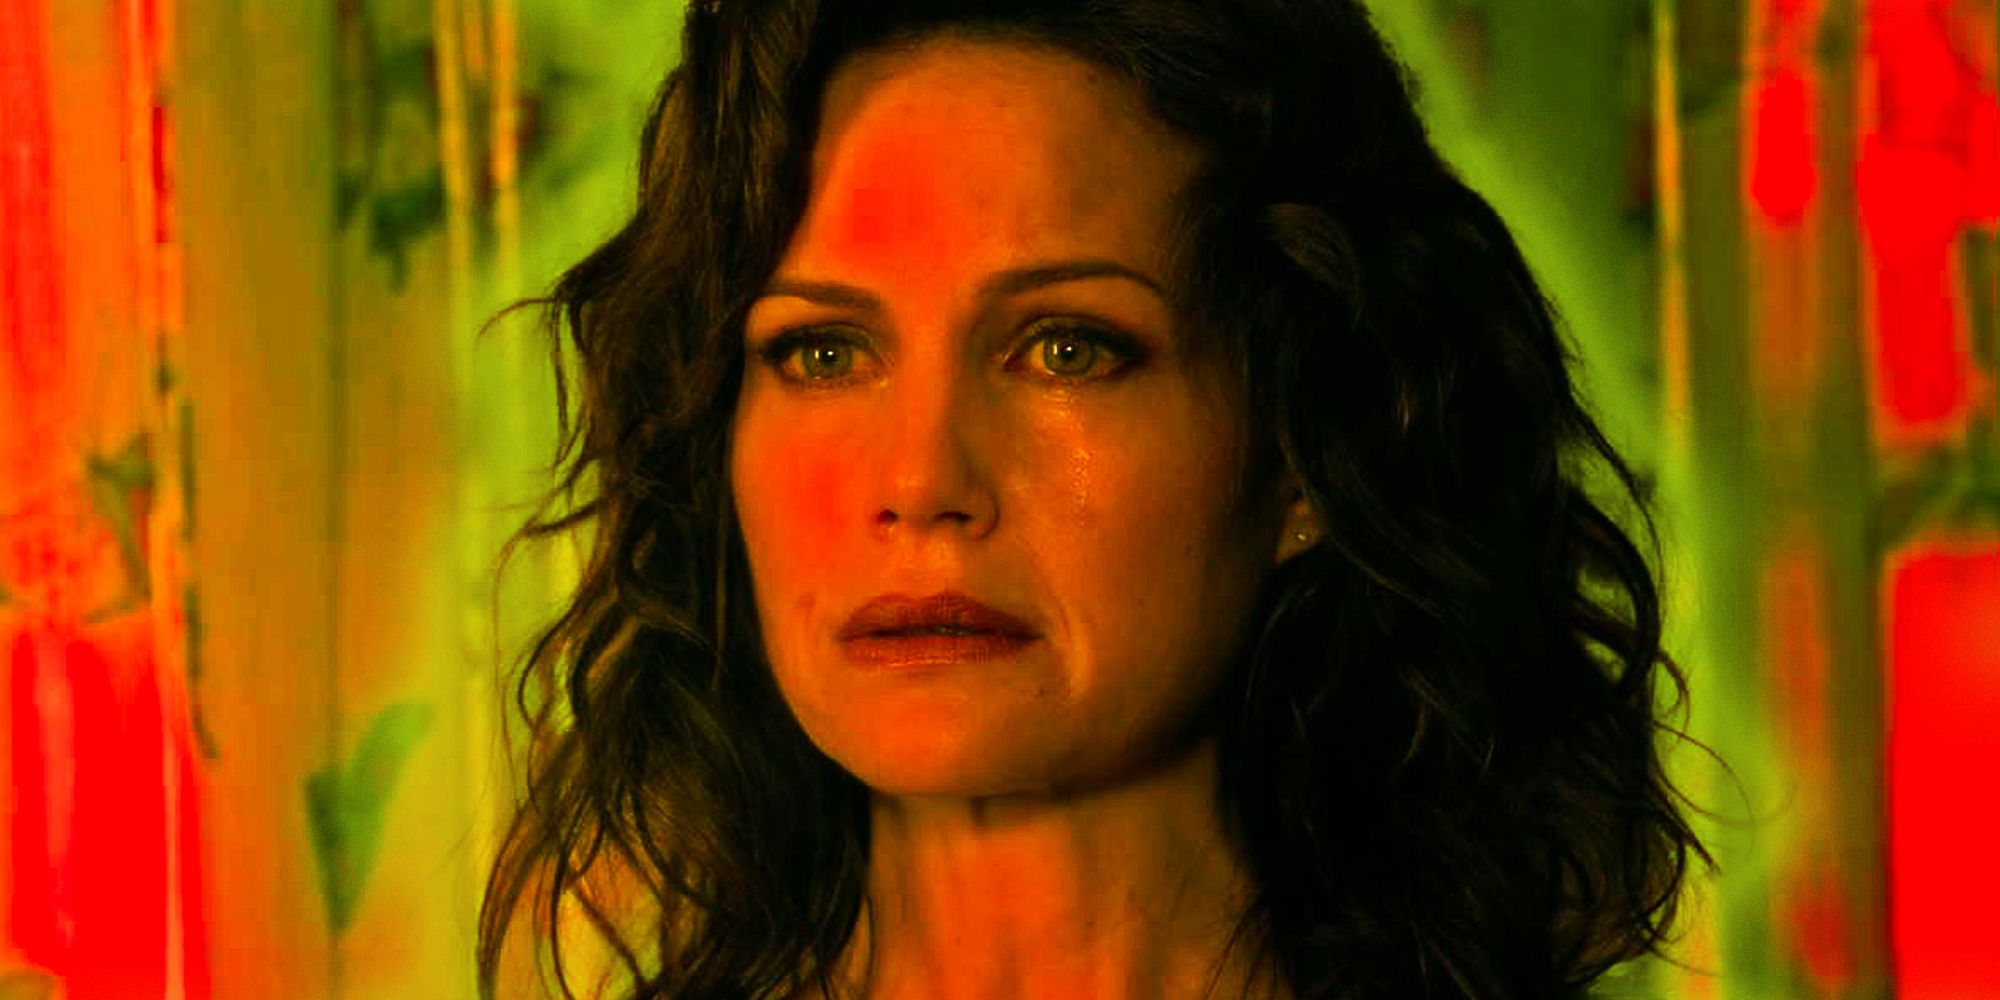 Carla Gugino as Jessie crying in Gerald's Game